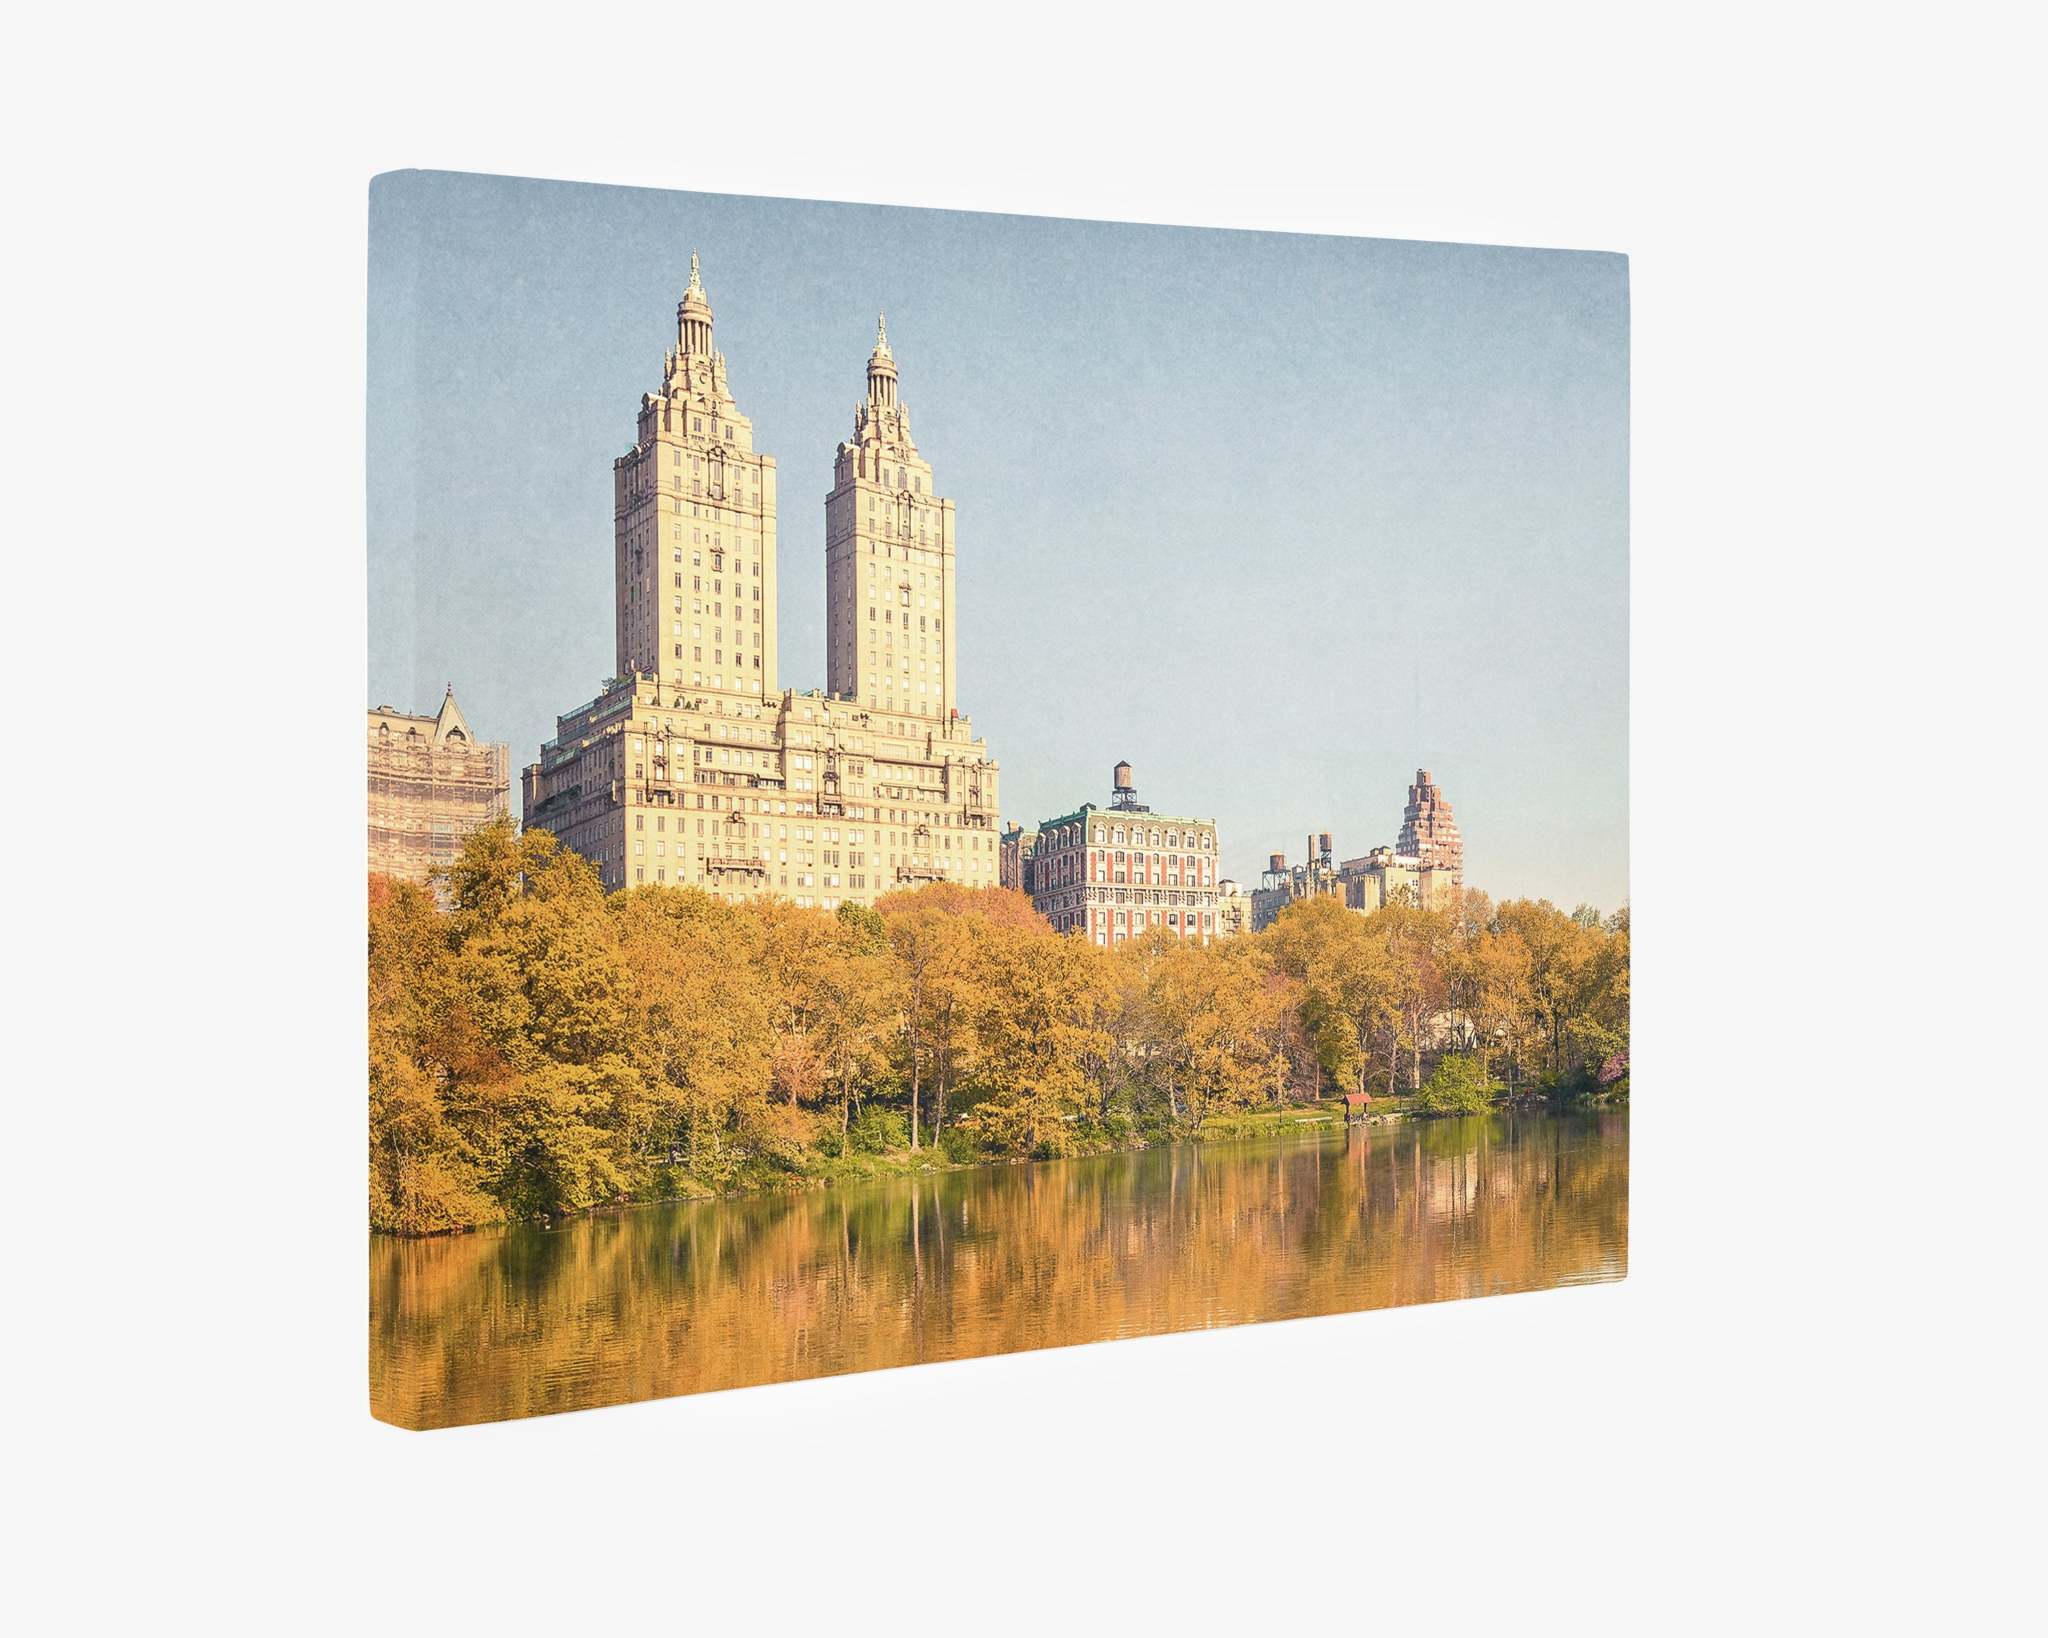 This New York City Canvas Wall Art, 'Central Park Fall' by Offley Green depicts a serene city park scene during autumn. The foreground features a calm lake surrounded by trees with golden foliage, while tall, historic skyscrapers rise against a clear blue sky in the background. This ready-to-hang solution offers premium artist-grade quality for your space.